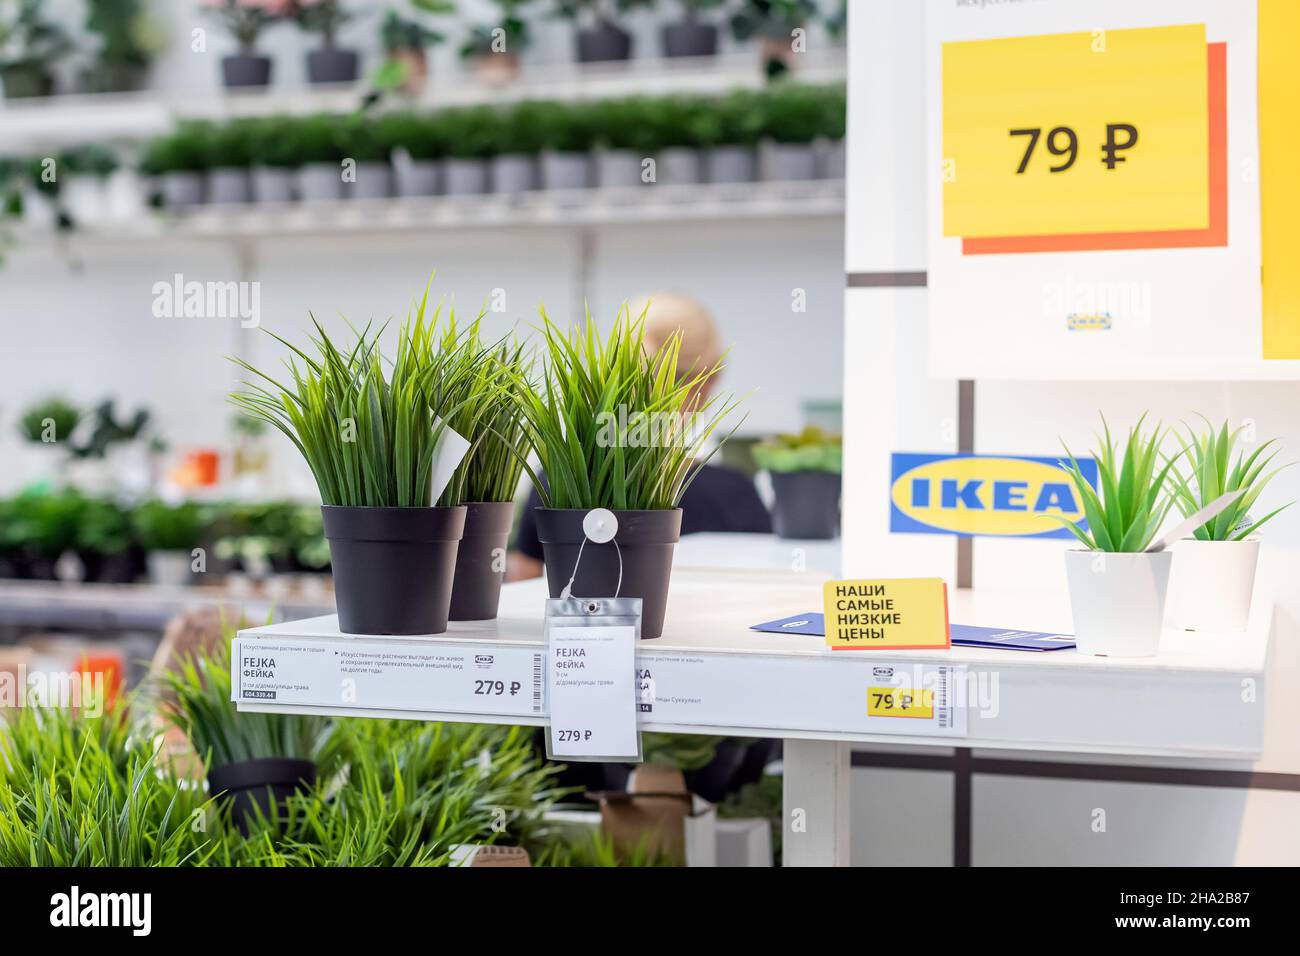 Ikea Plant Pot High Resolution Stock Photography and Images - Alamy